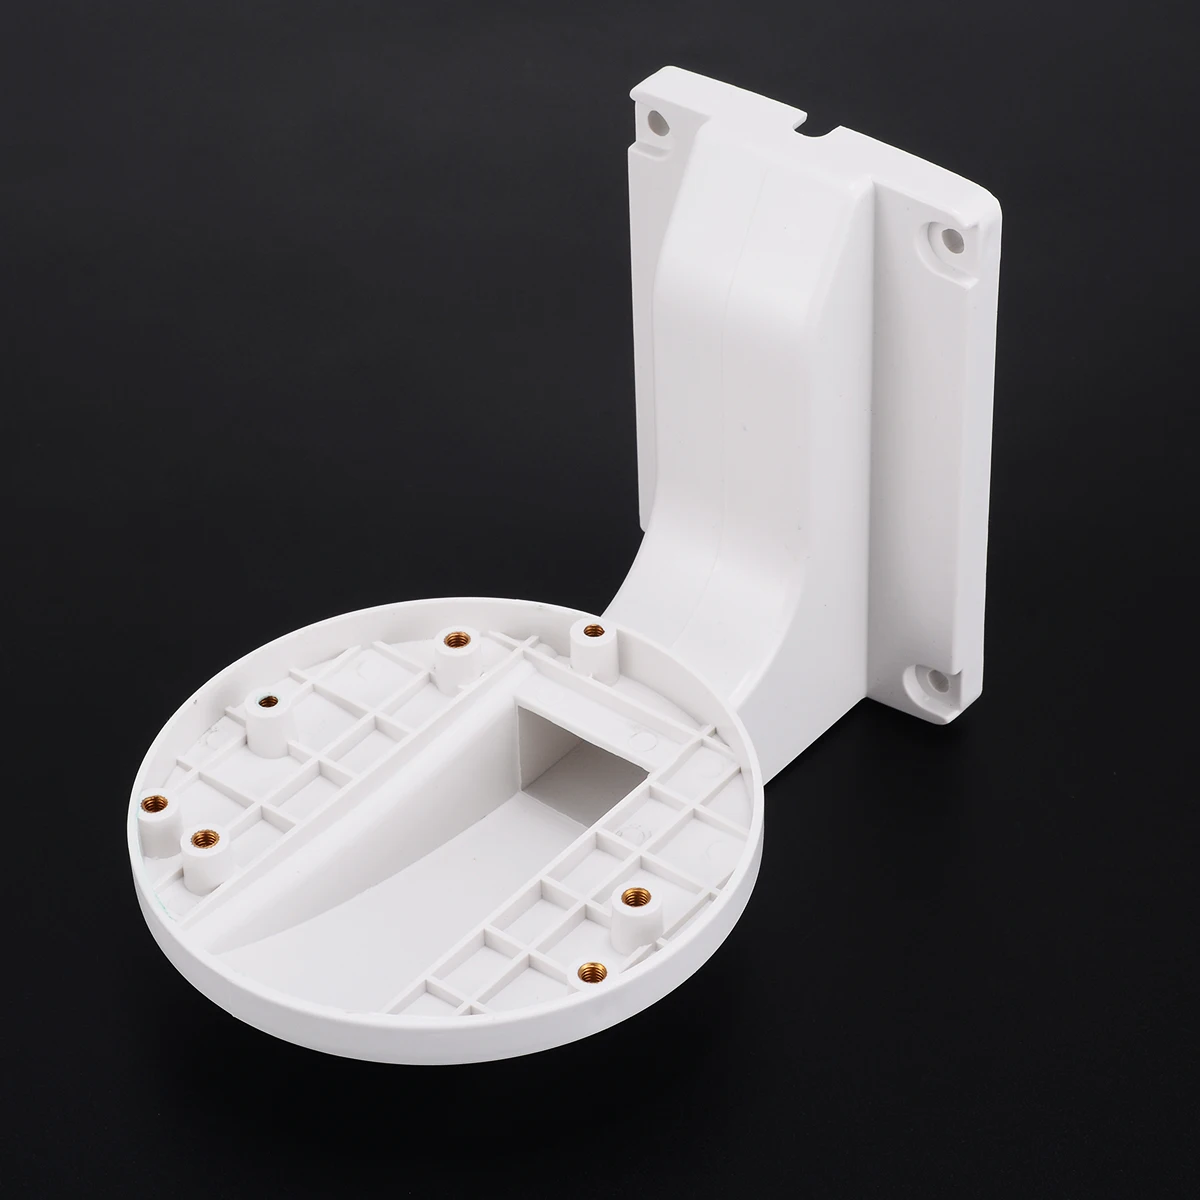 CCTV Security Wall Mount Bracket Stand for Surveillance IP Dome Camera Indoor Mini Dome Cameras Accessories Mayitr